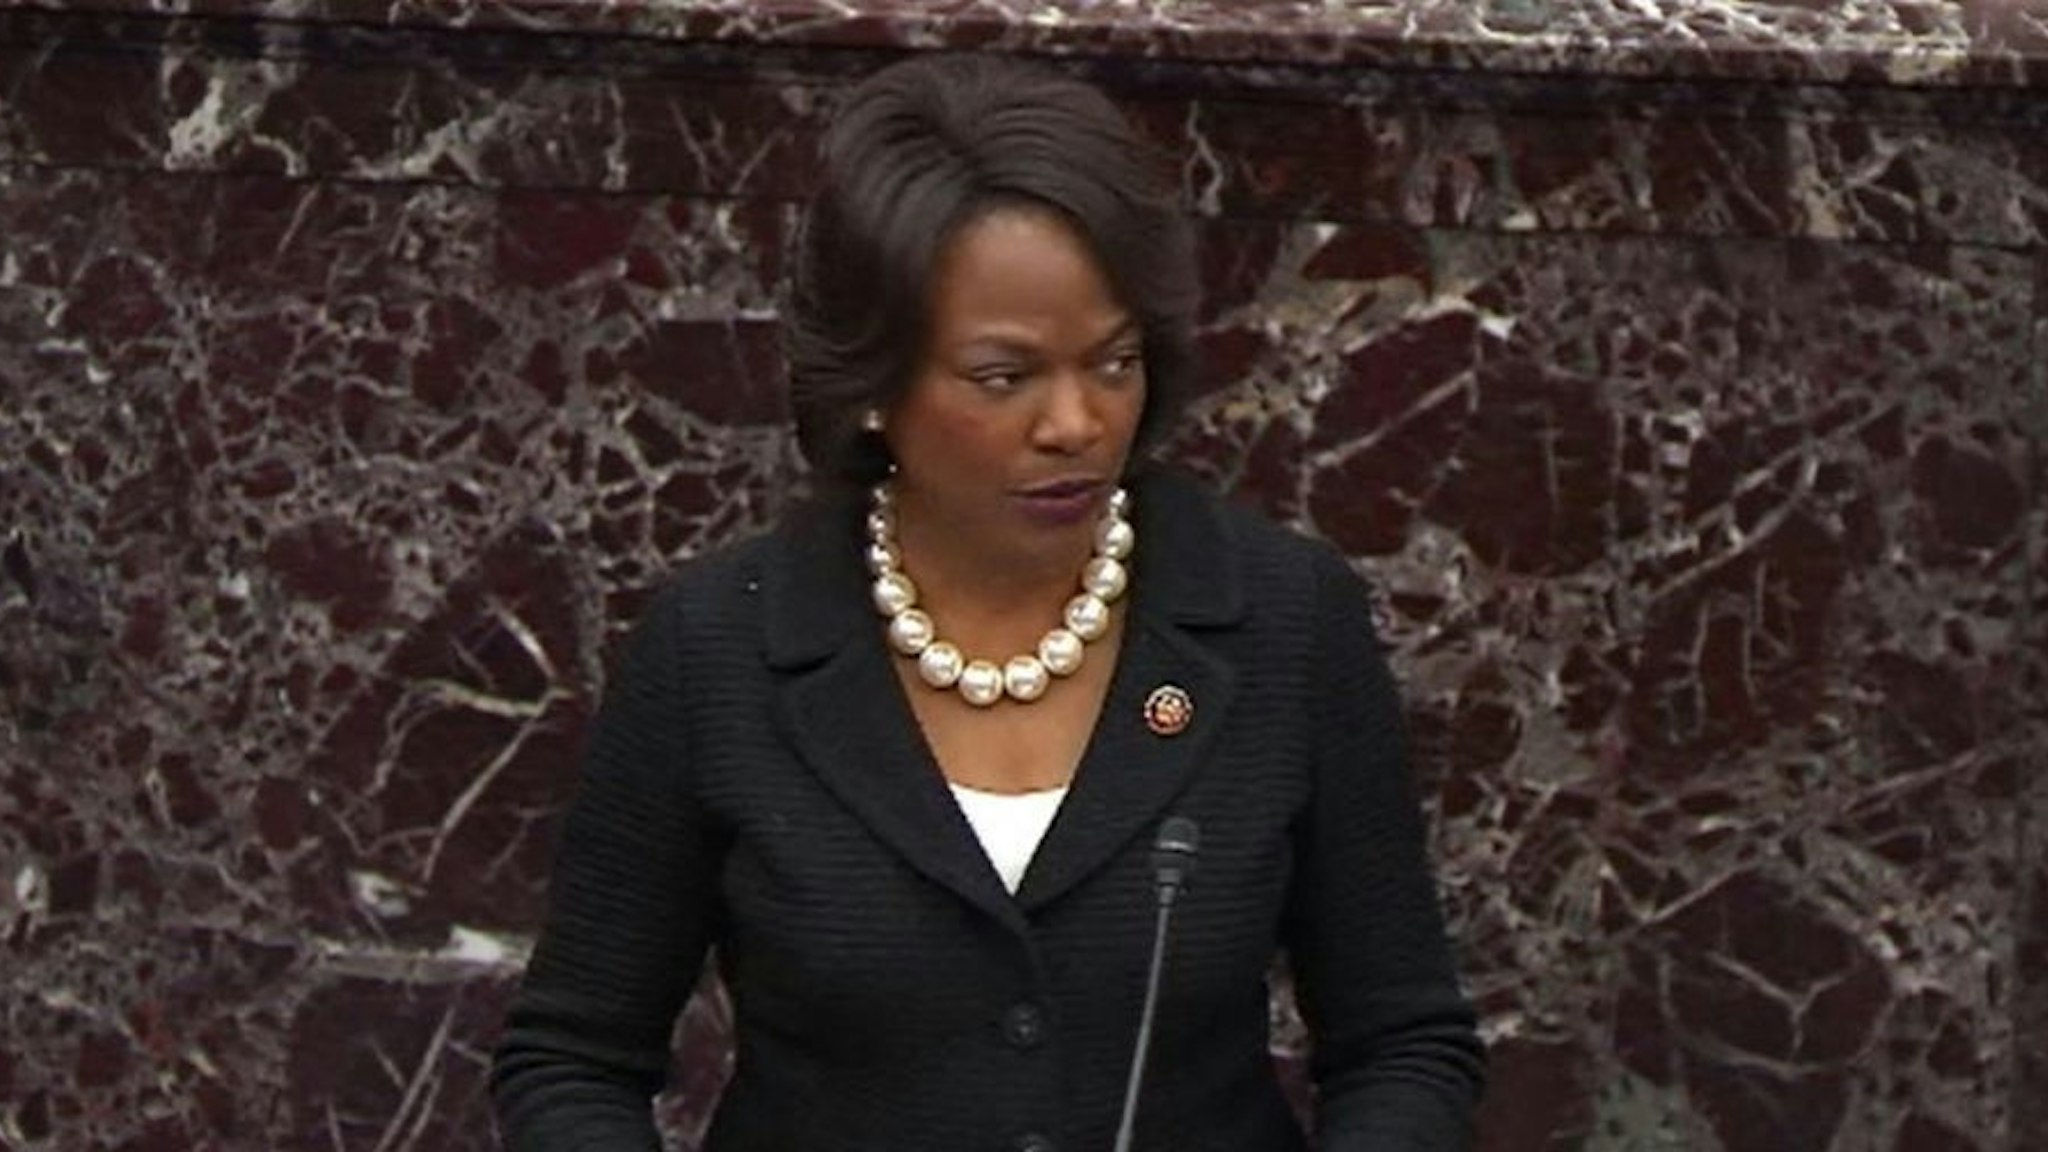 WASHINGTON, DC - JANUARY 31: In this screengrab taken from a Senate Television webcast, House manager Rep. Val Demings (D-FL) speaks during impeachment proceedings against U.S. President Donald Trump in the Senate at the U.S. Capitol on January 31, 2020 in Washington, DC. (Photo by